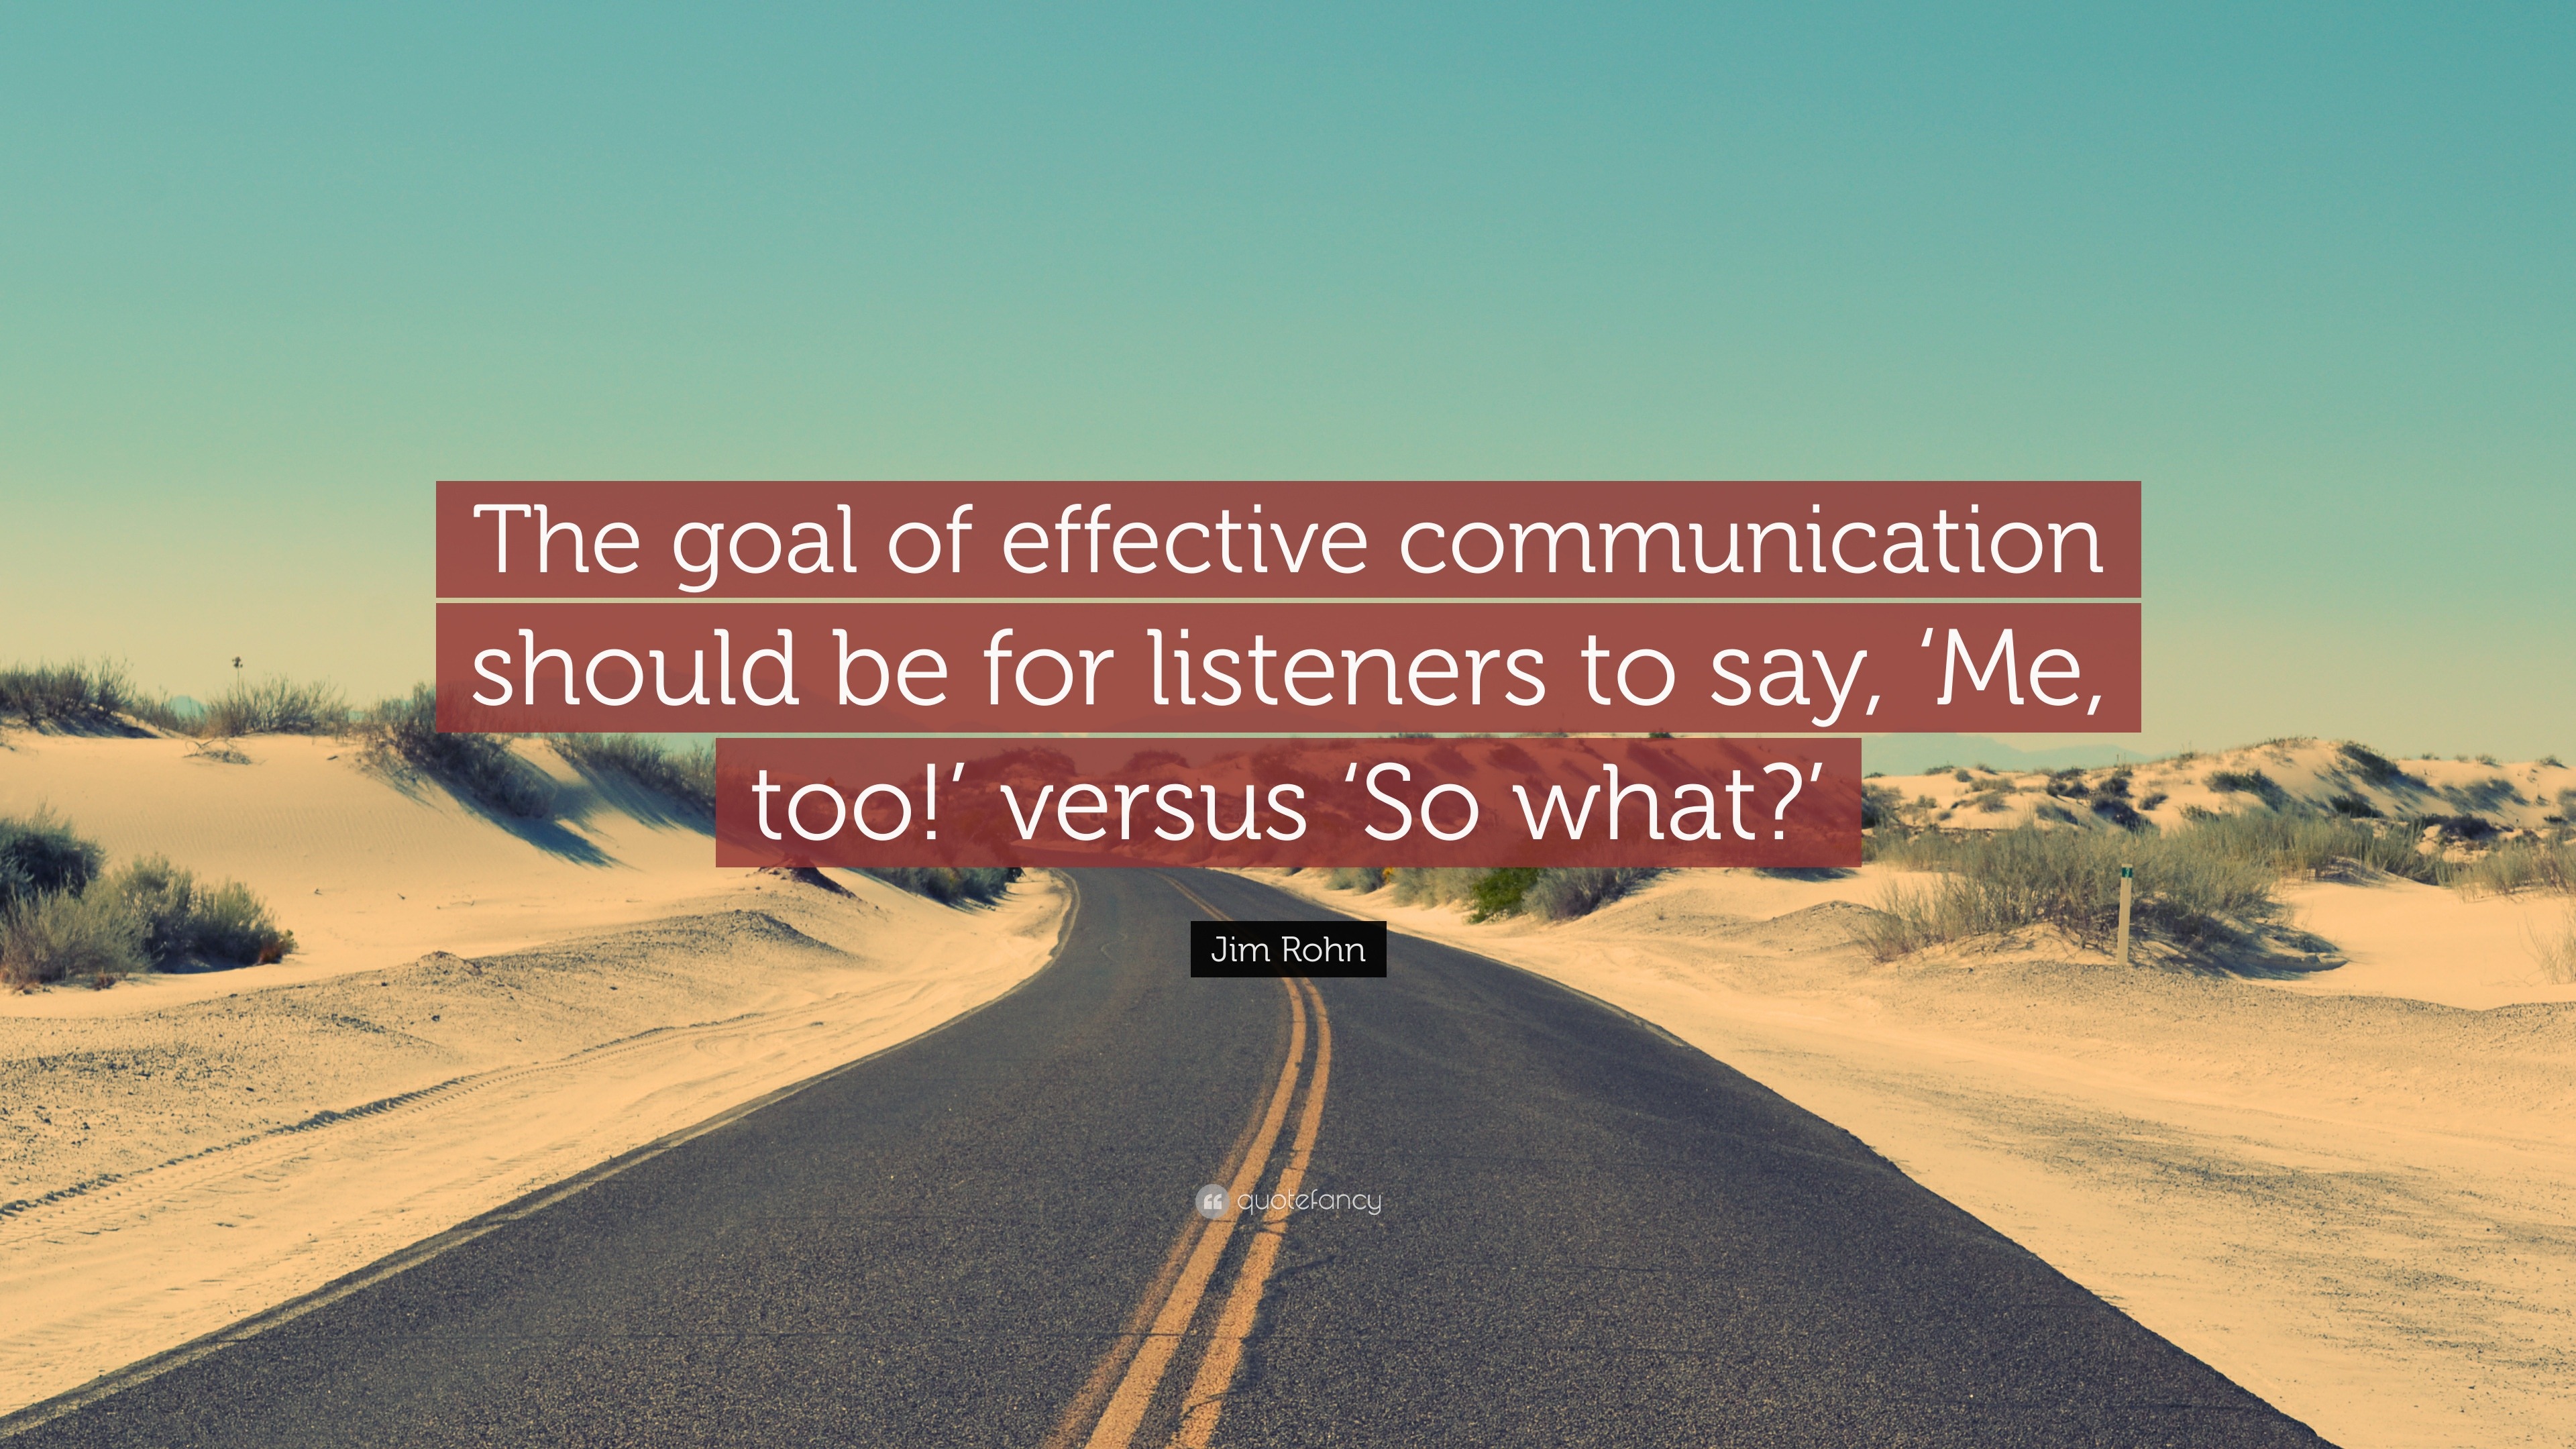 Image result for “The goal of effective communication should be for listeners to say, ‘Me, too!’ versus ‘So what?'”